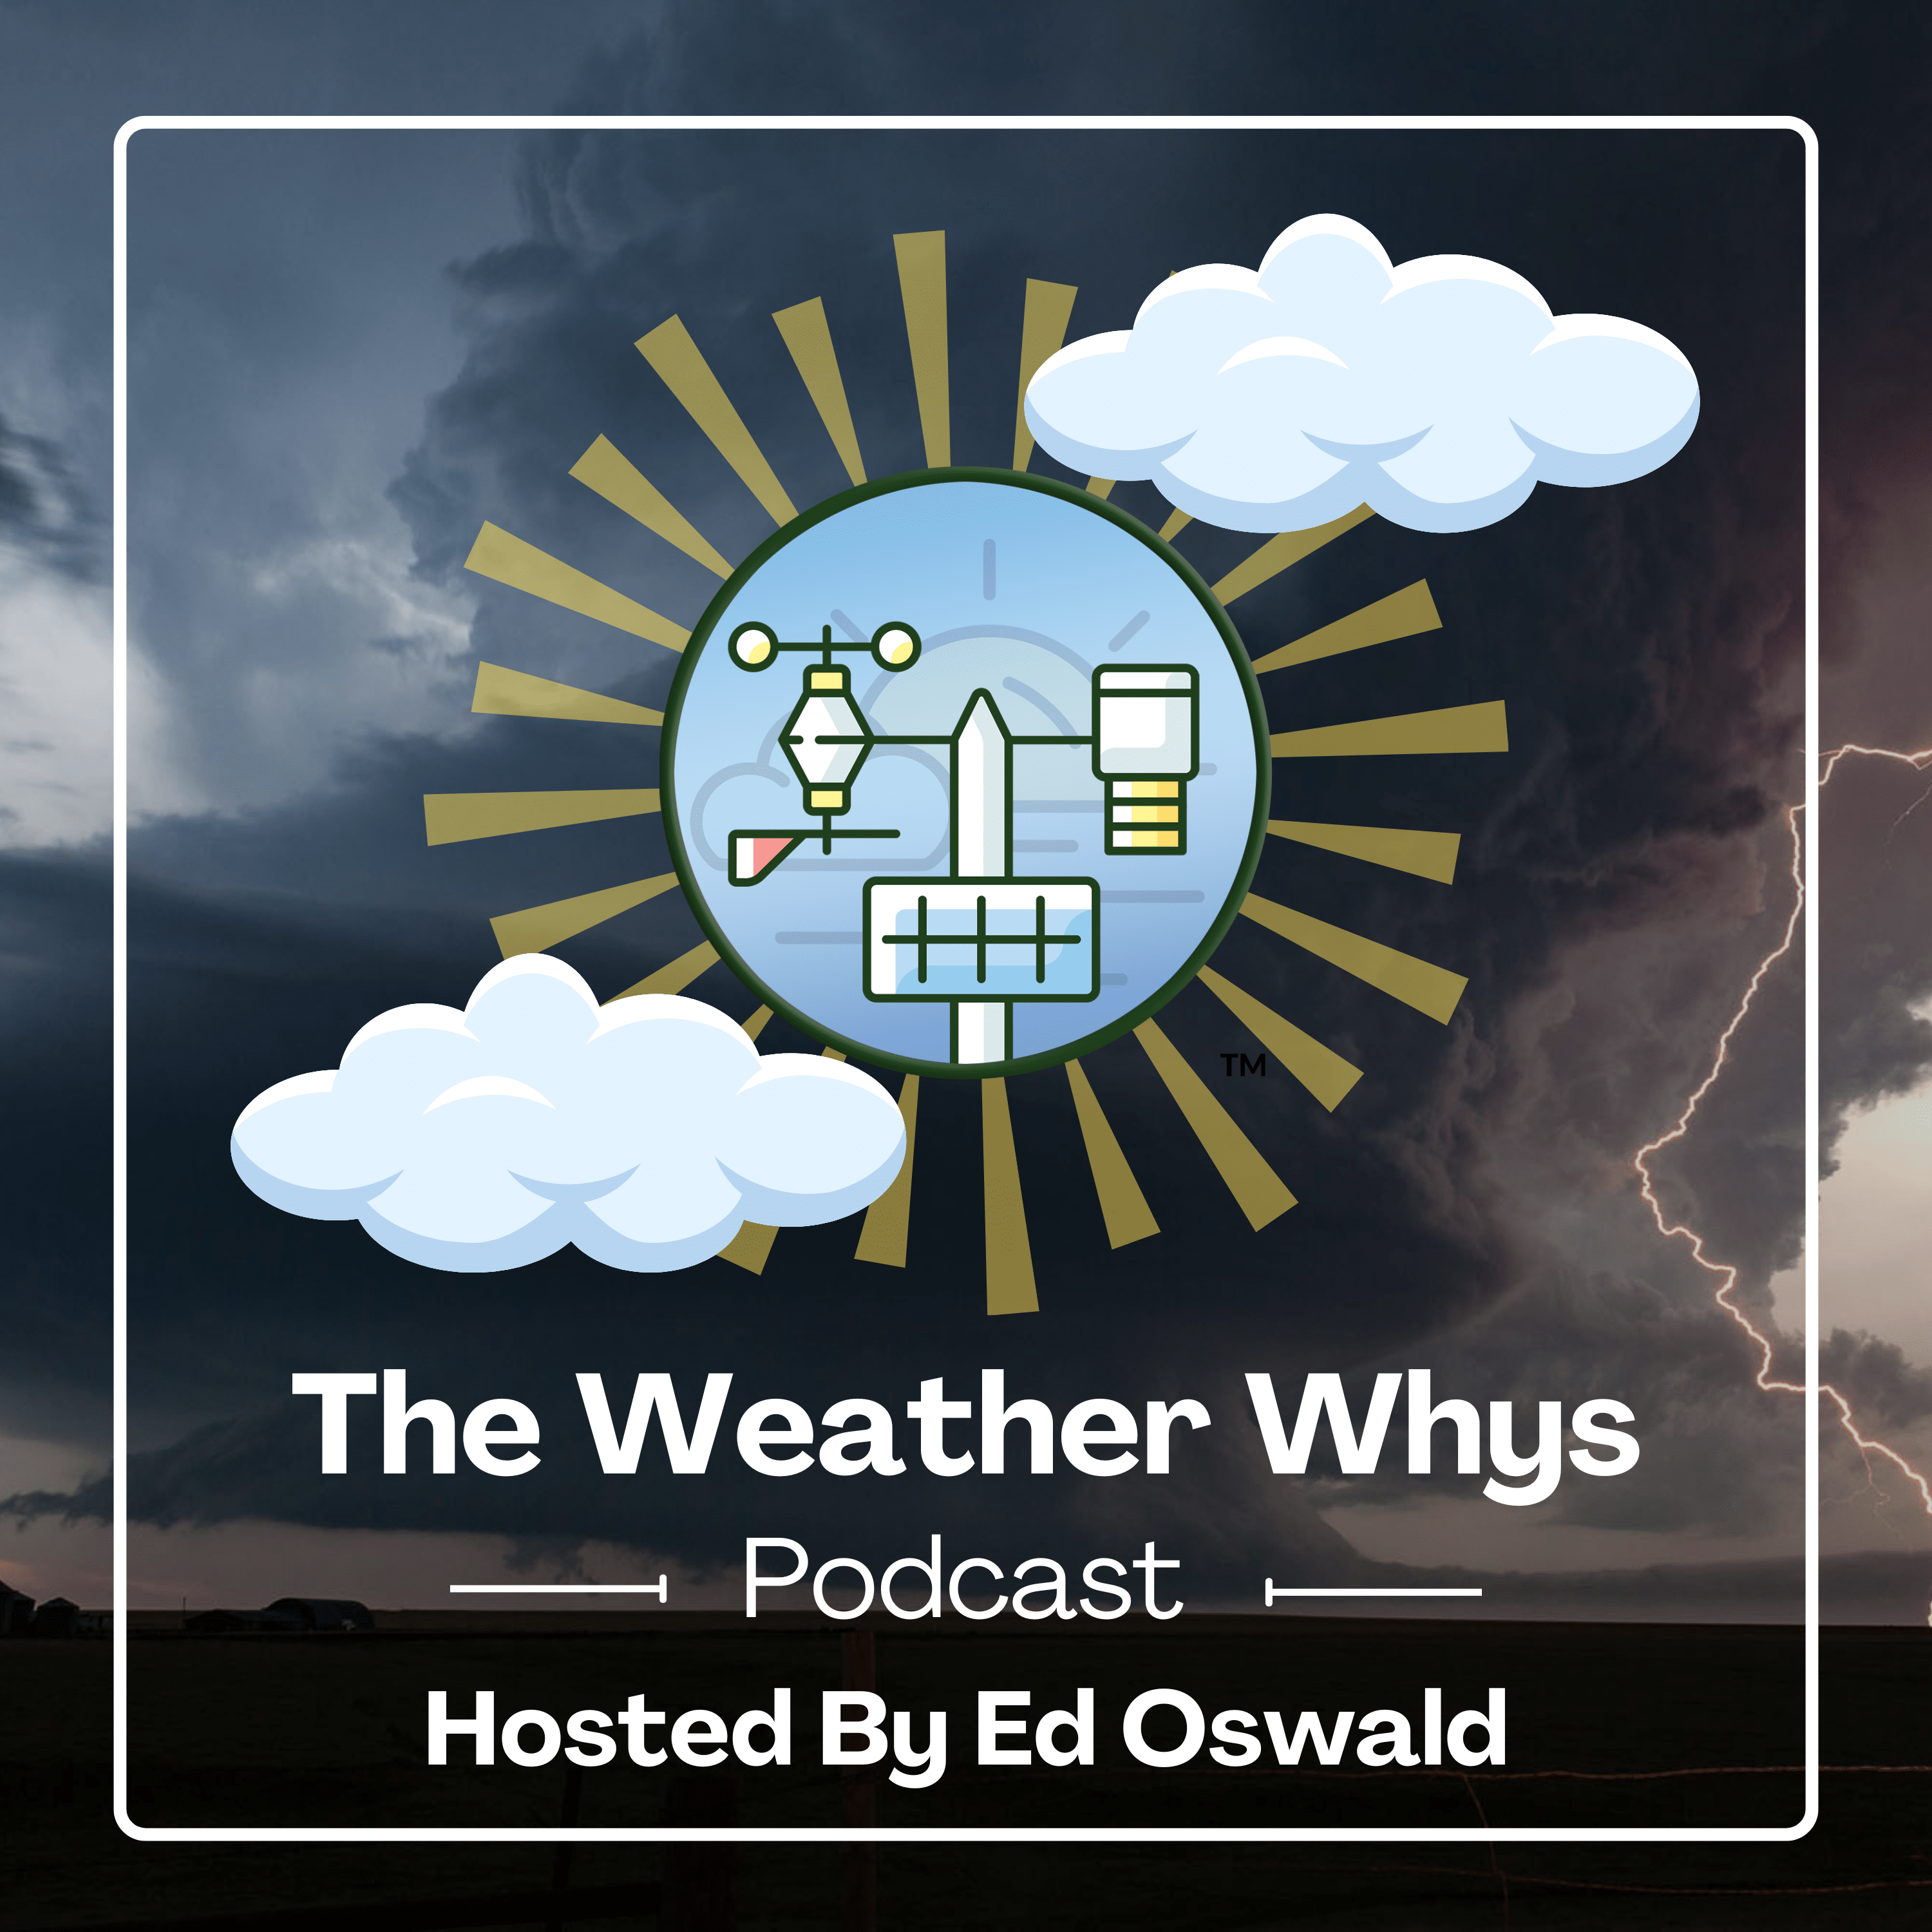 Le podcast "The Weather Whys